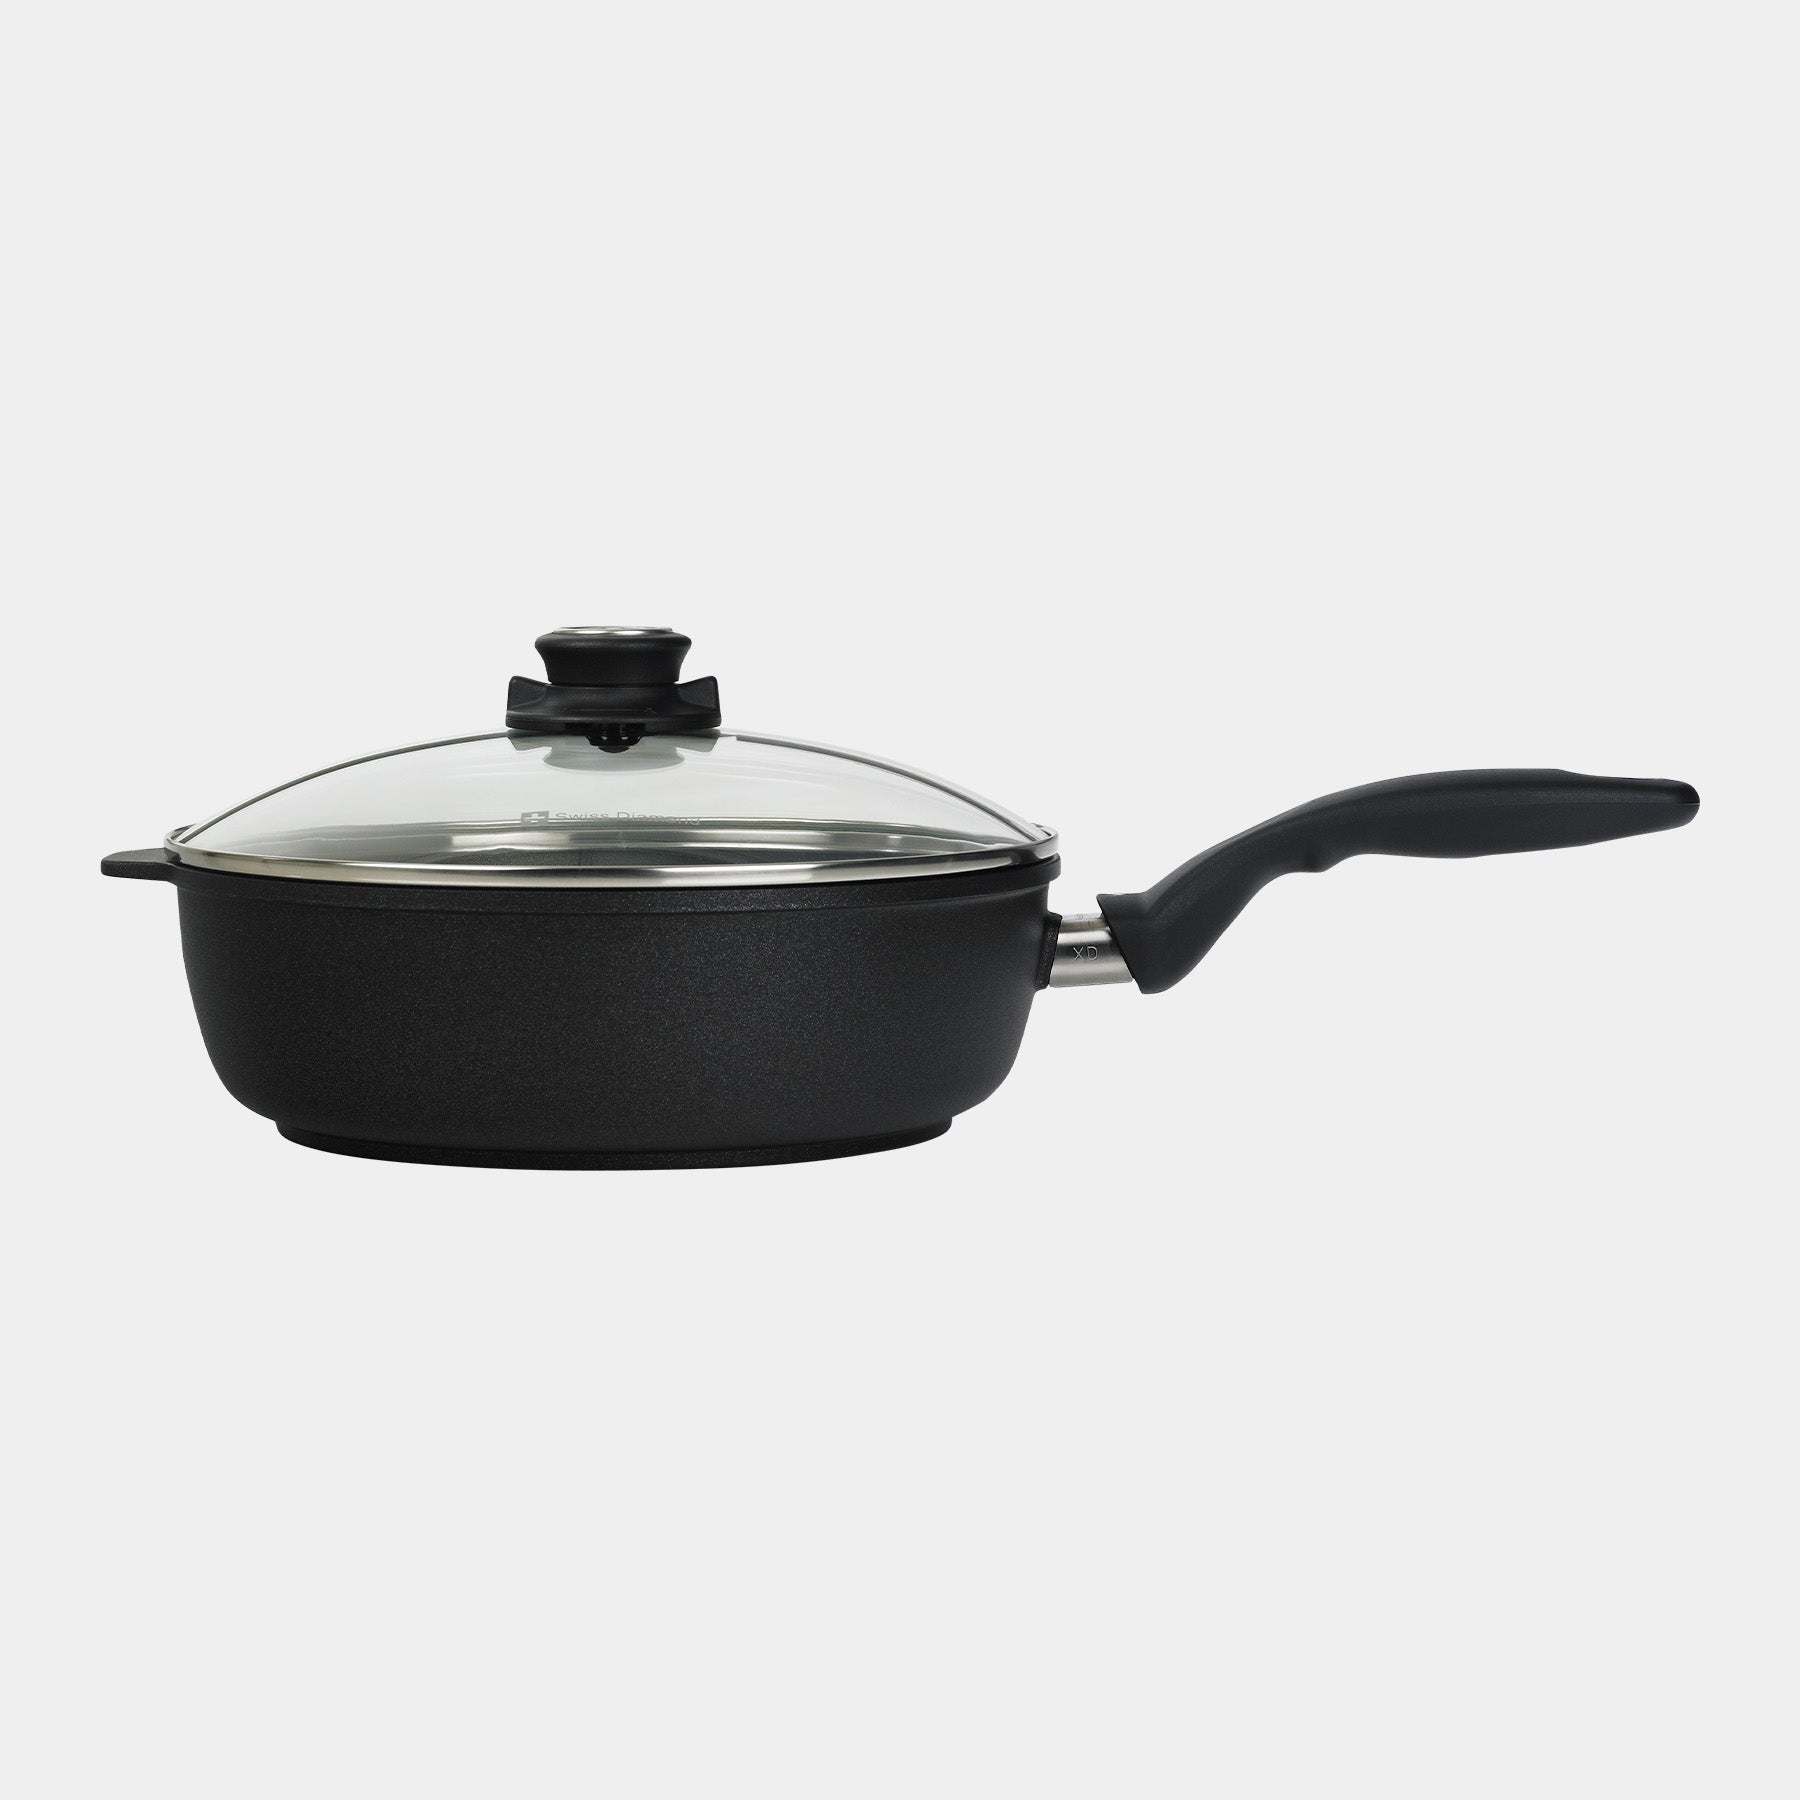 XD Nonstick 3.2 qt Saute Pan with Glass Lid Side View